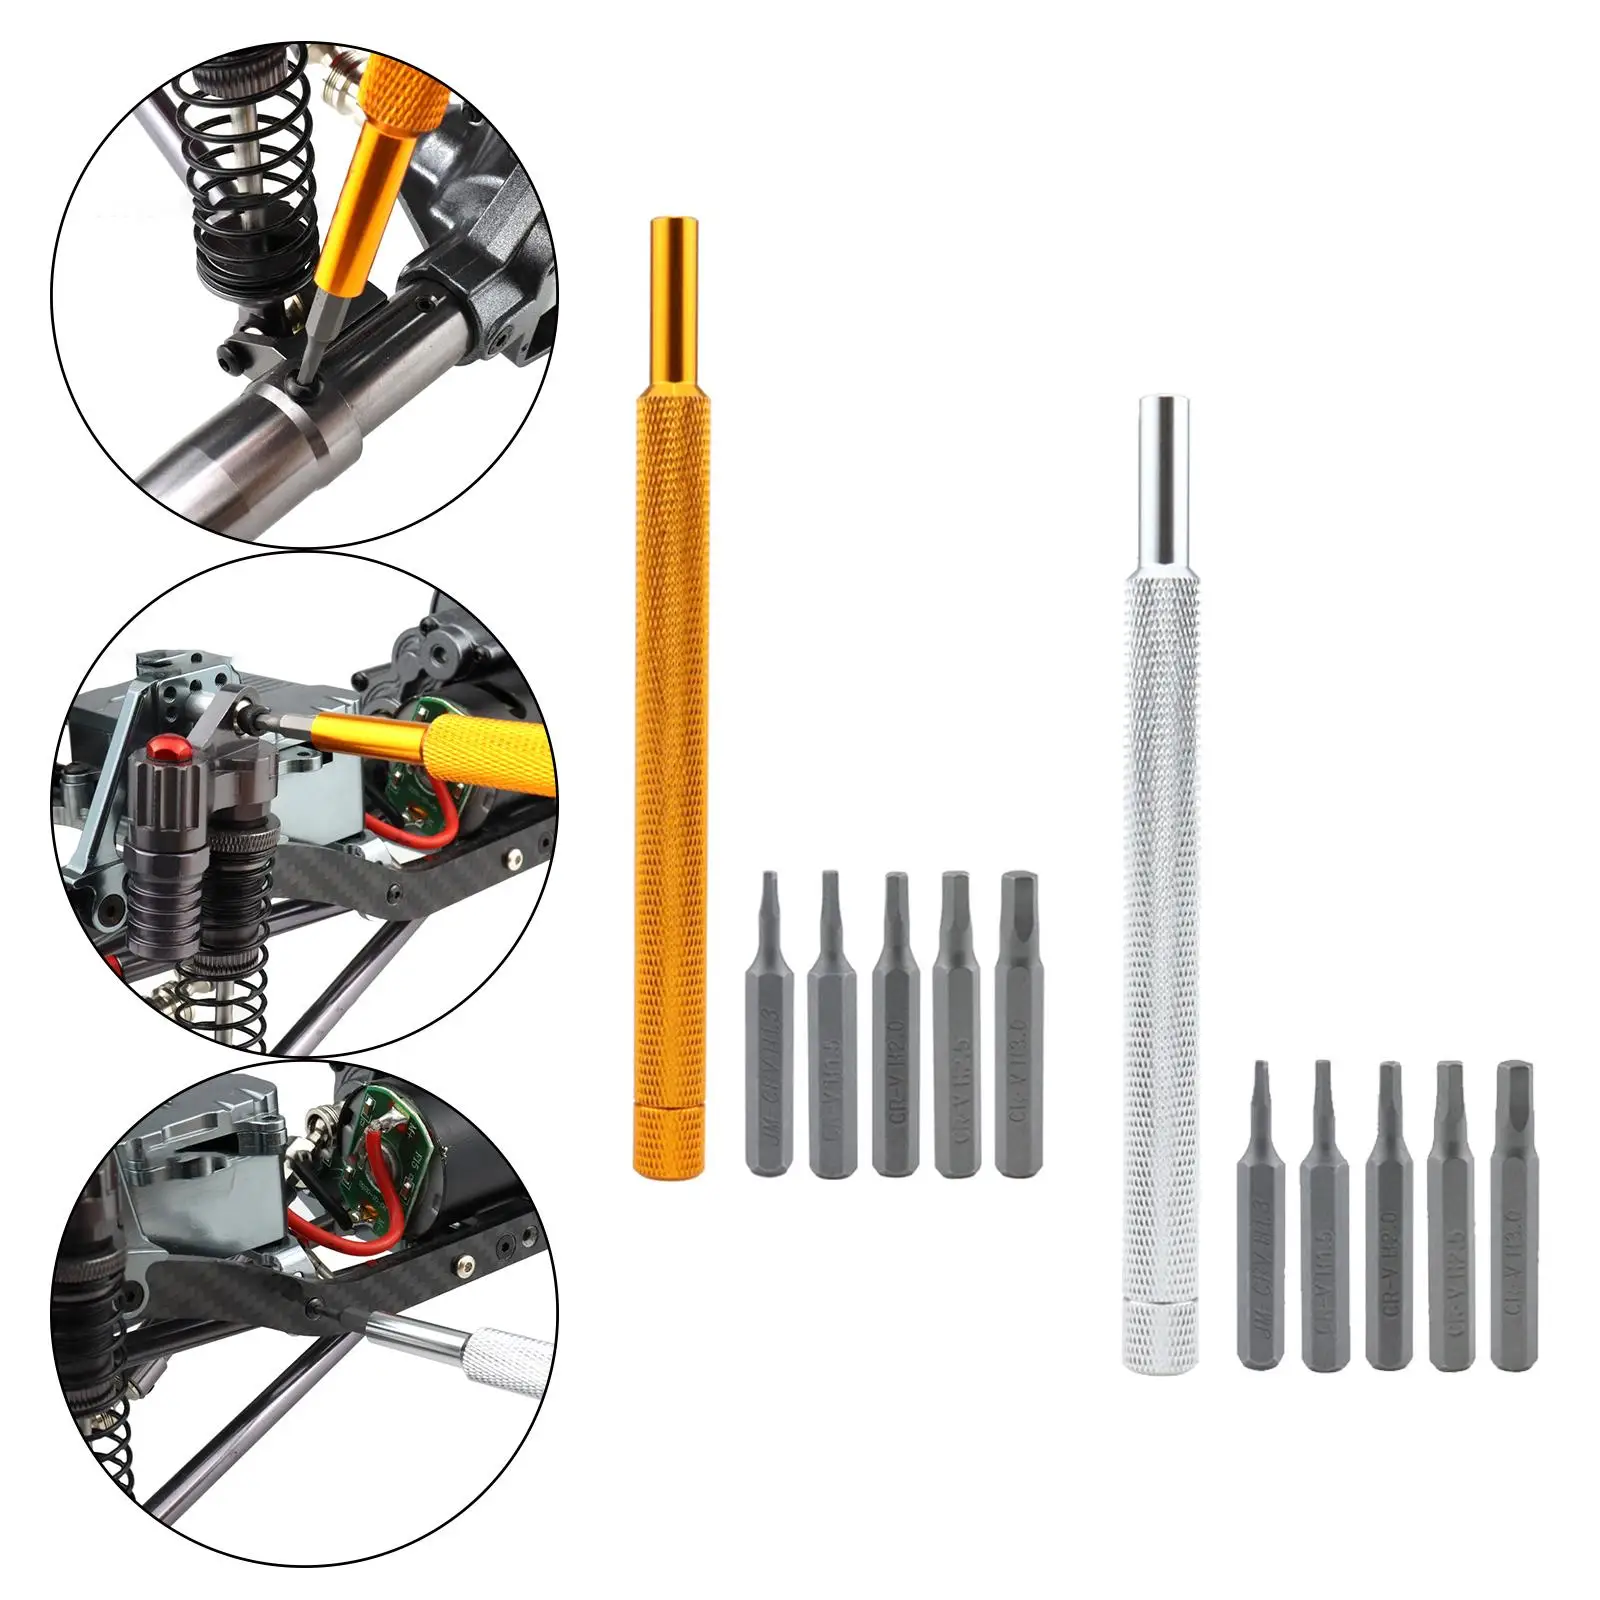 6Pcs Screw Driver Tools Kit Set RC Repair Tools Kit with 1.3mm 1.5mm 2.0mm 2.5mm 3.0mm Bits for RC Boat Boat Parts